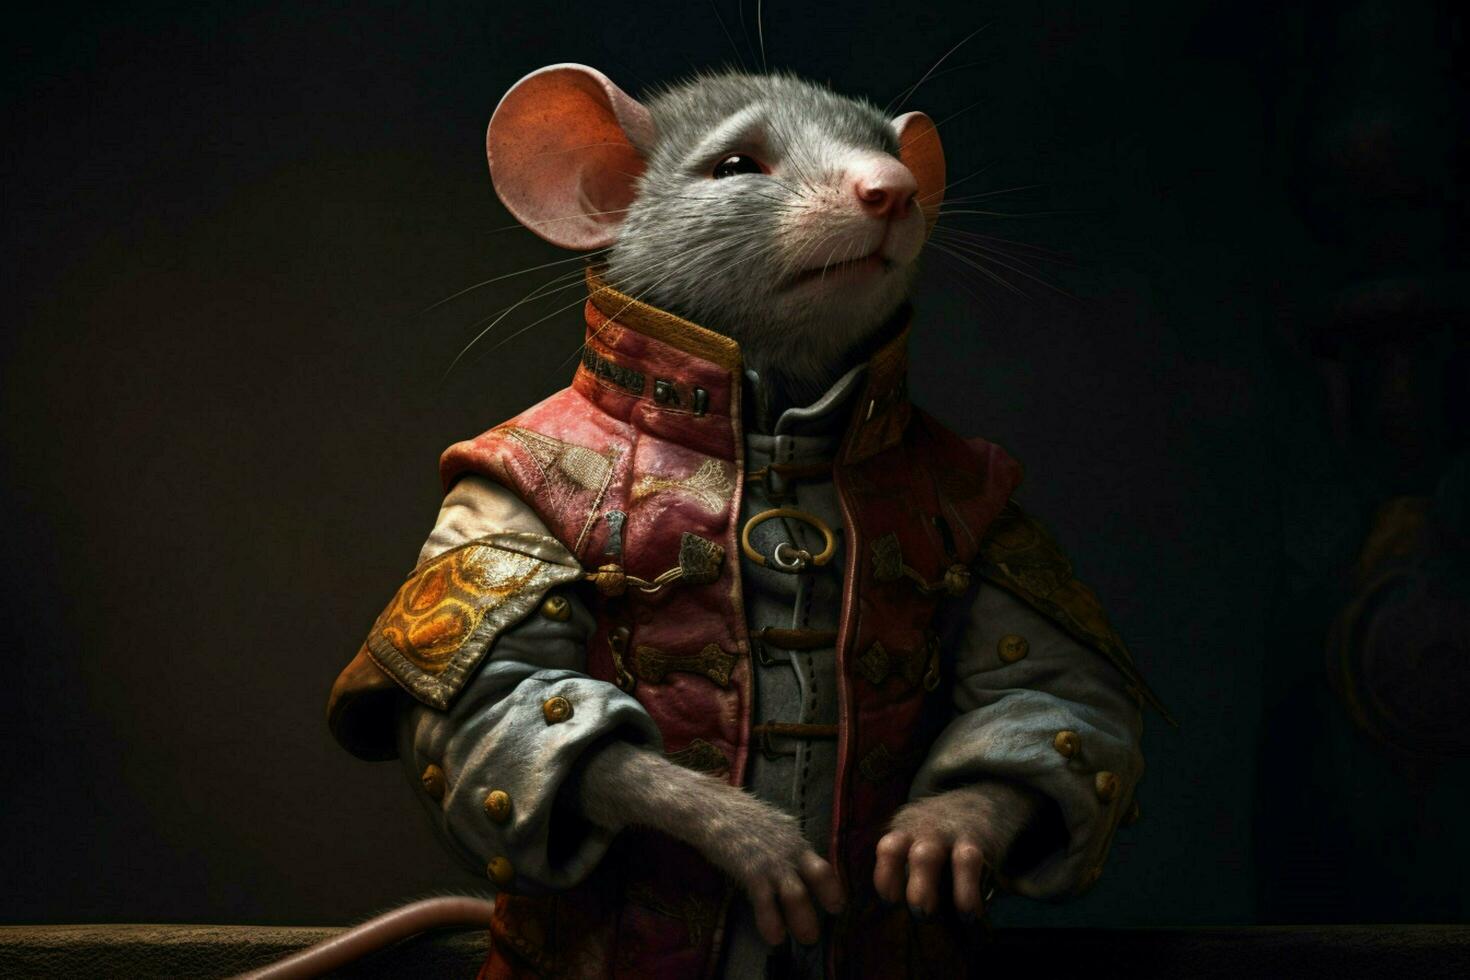 a character from the game rat photo